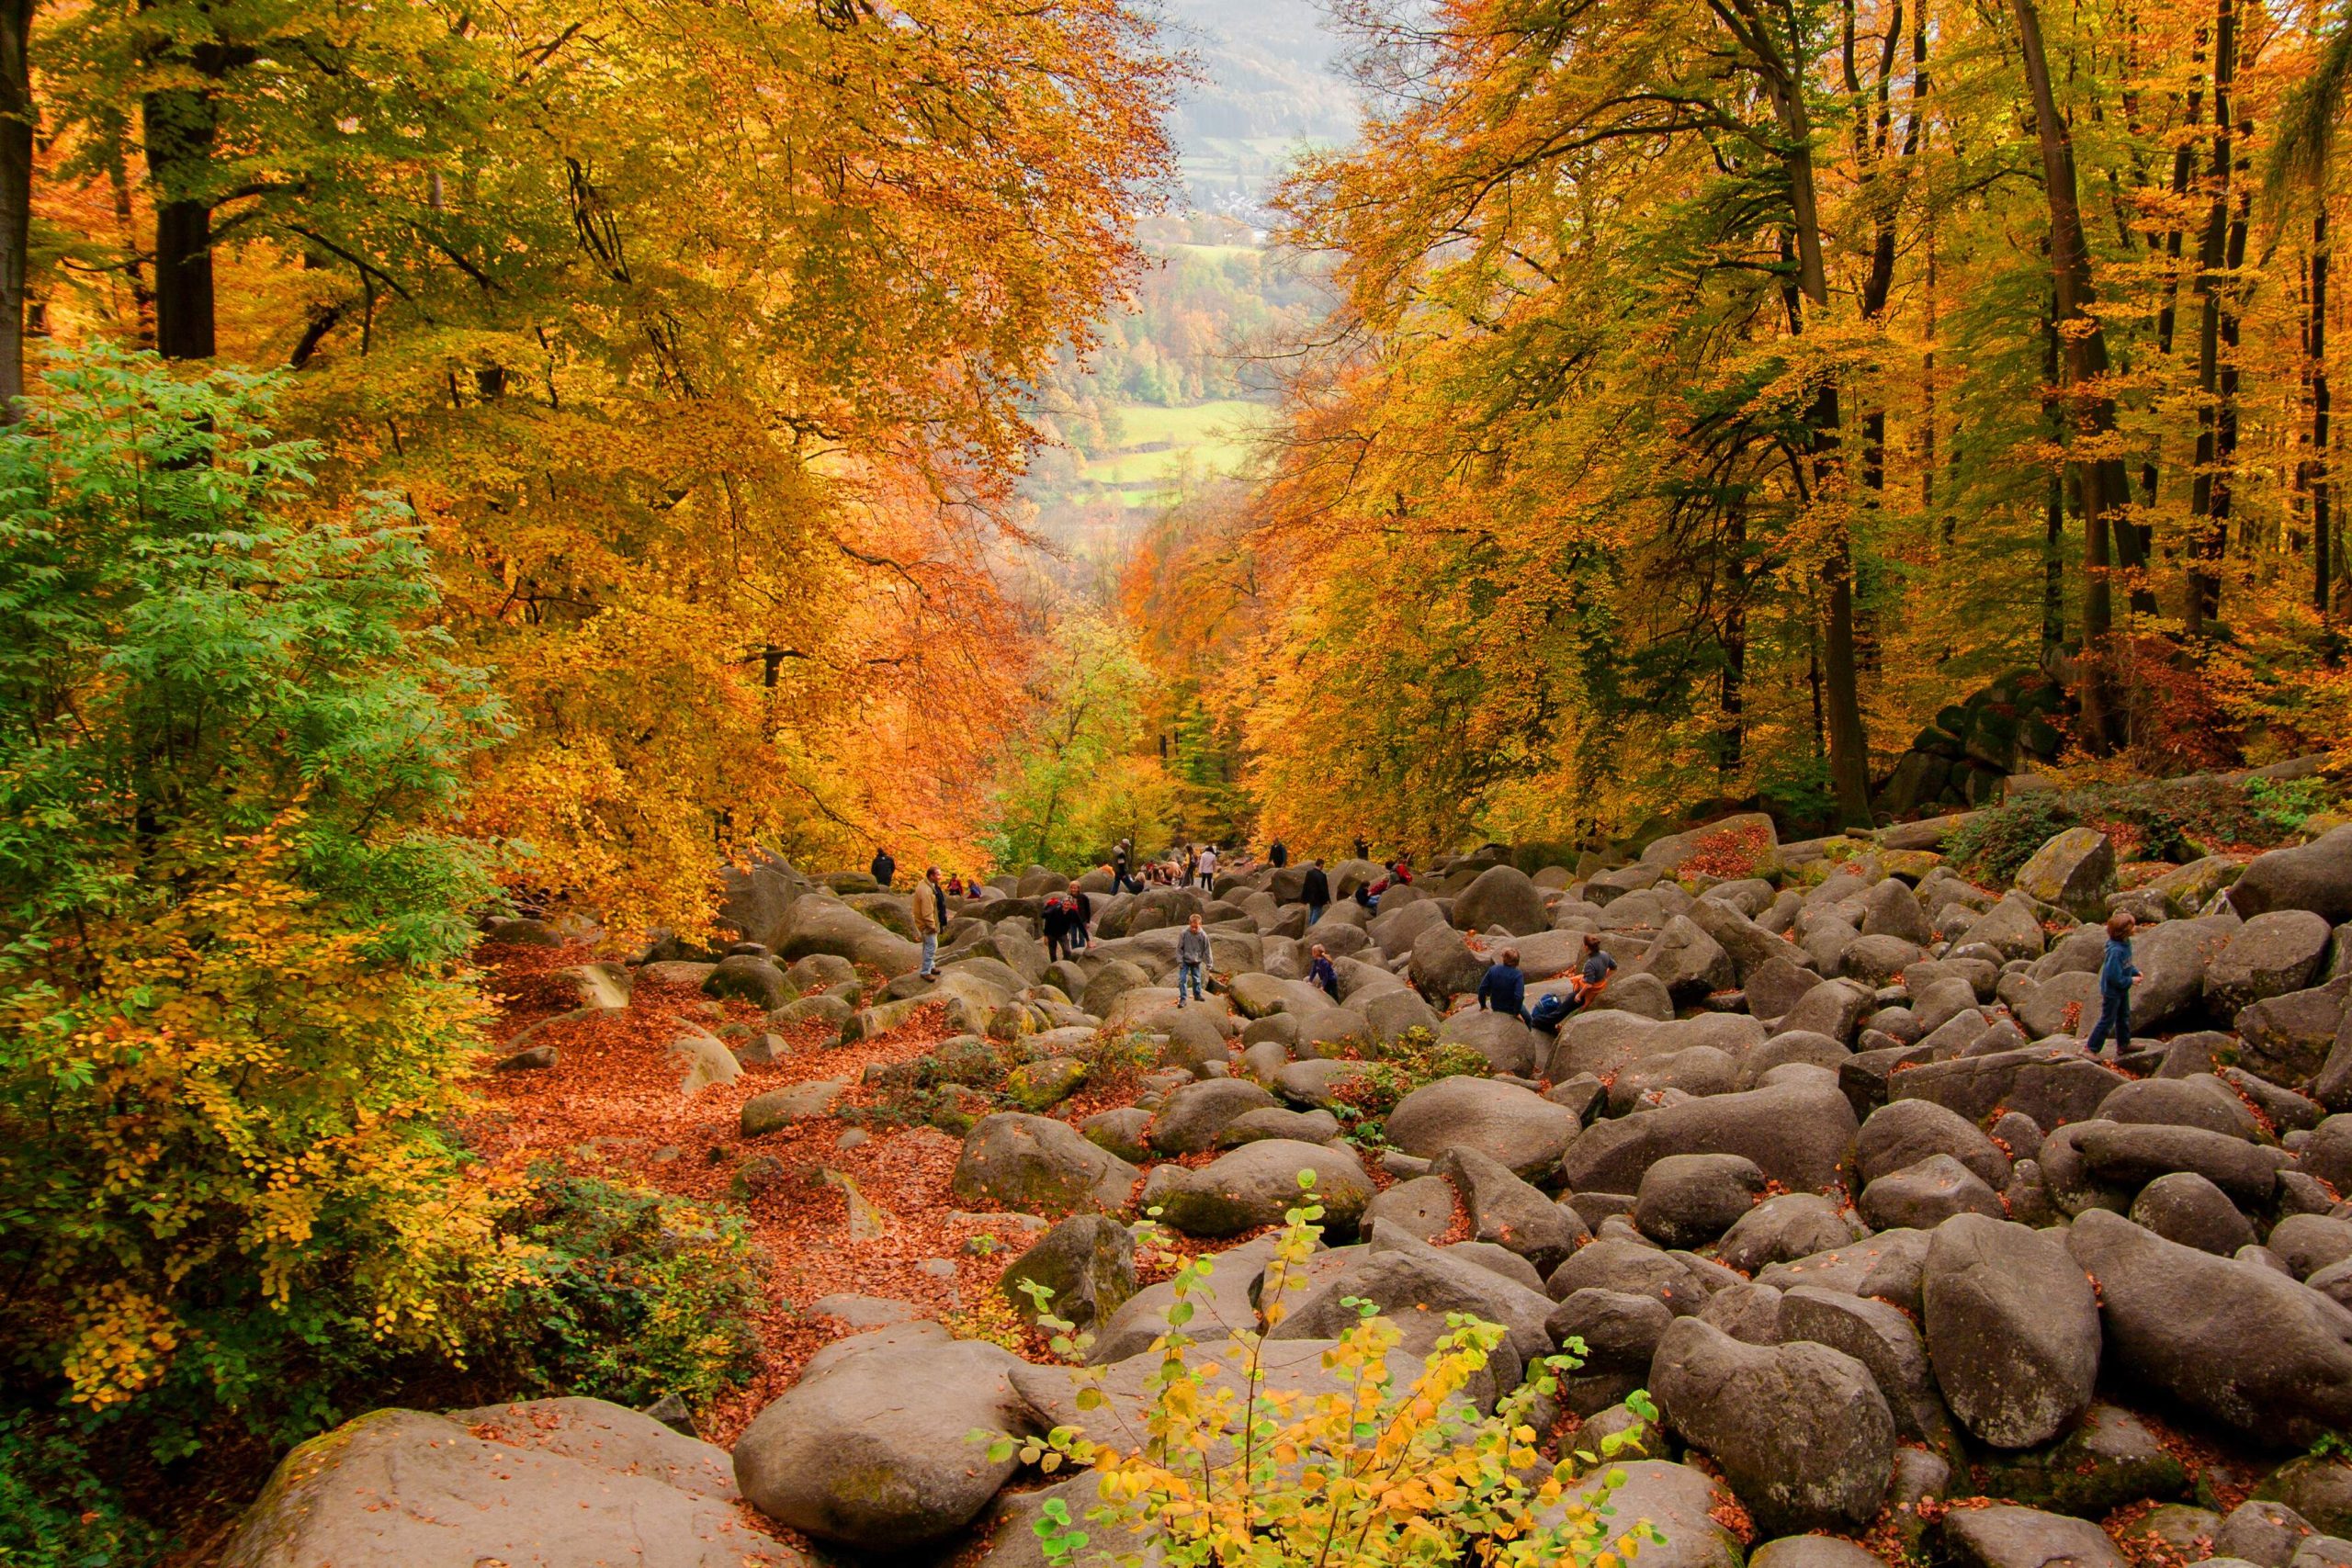 Tourists of various ages wander on a pile of boulders surrounded by lush tall trees in autumn.